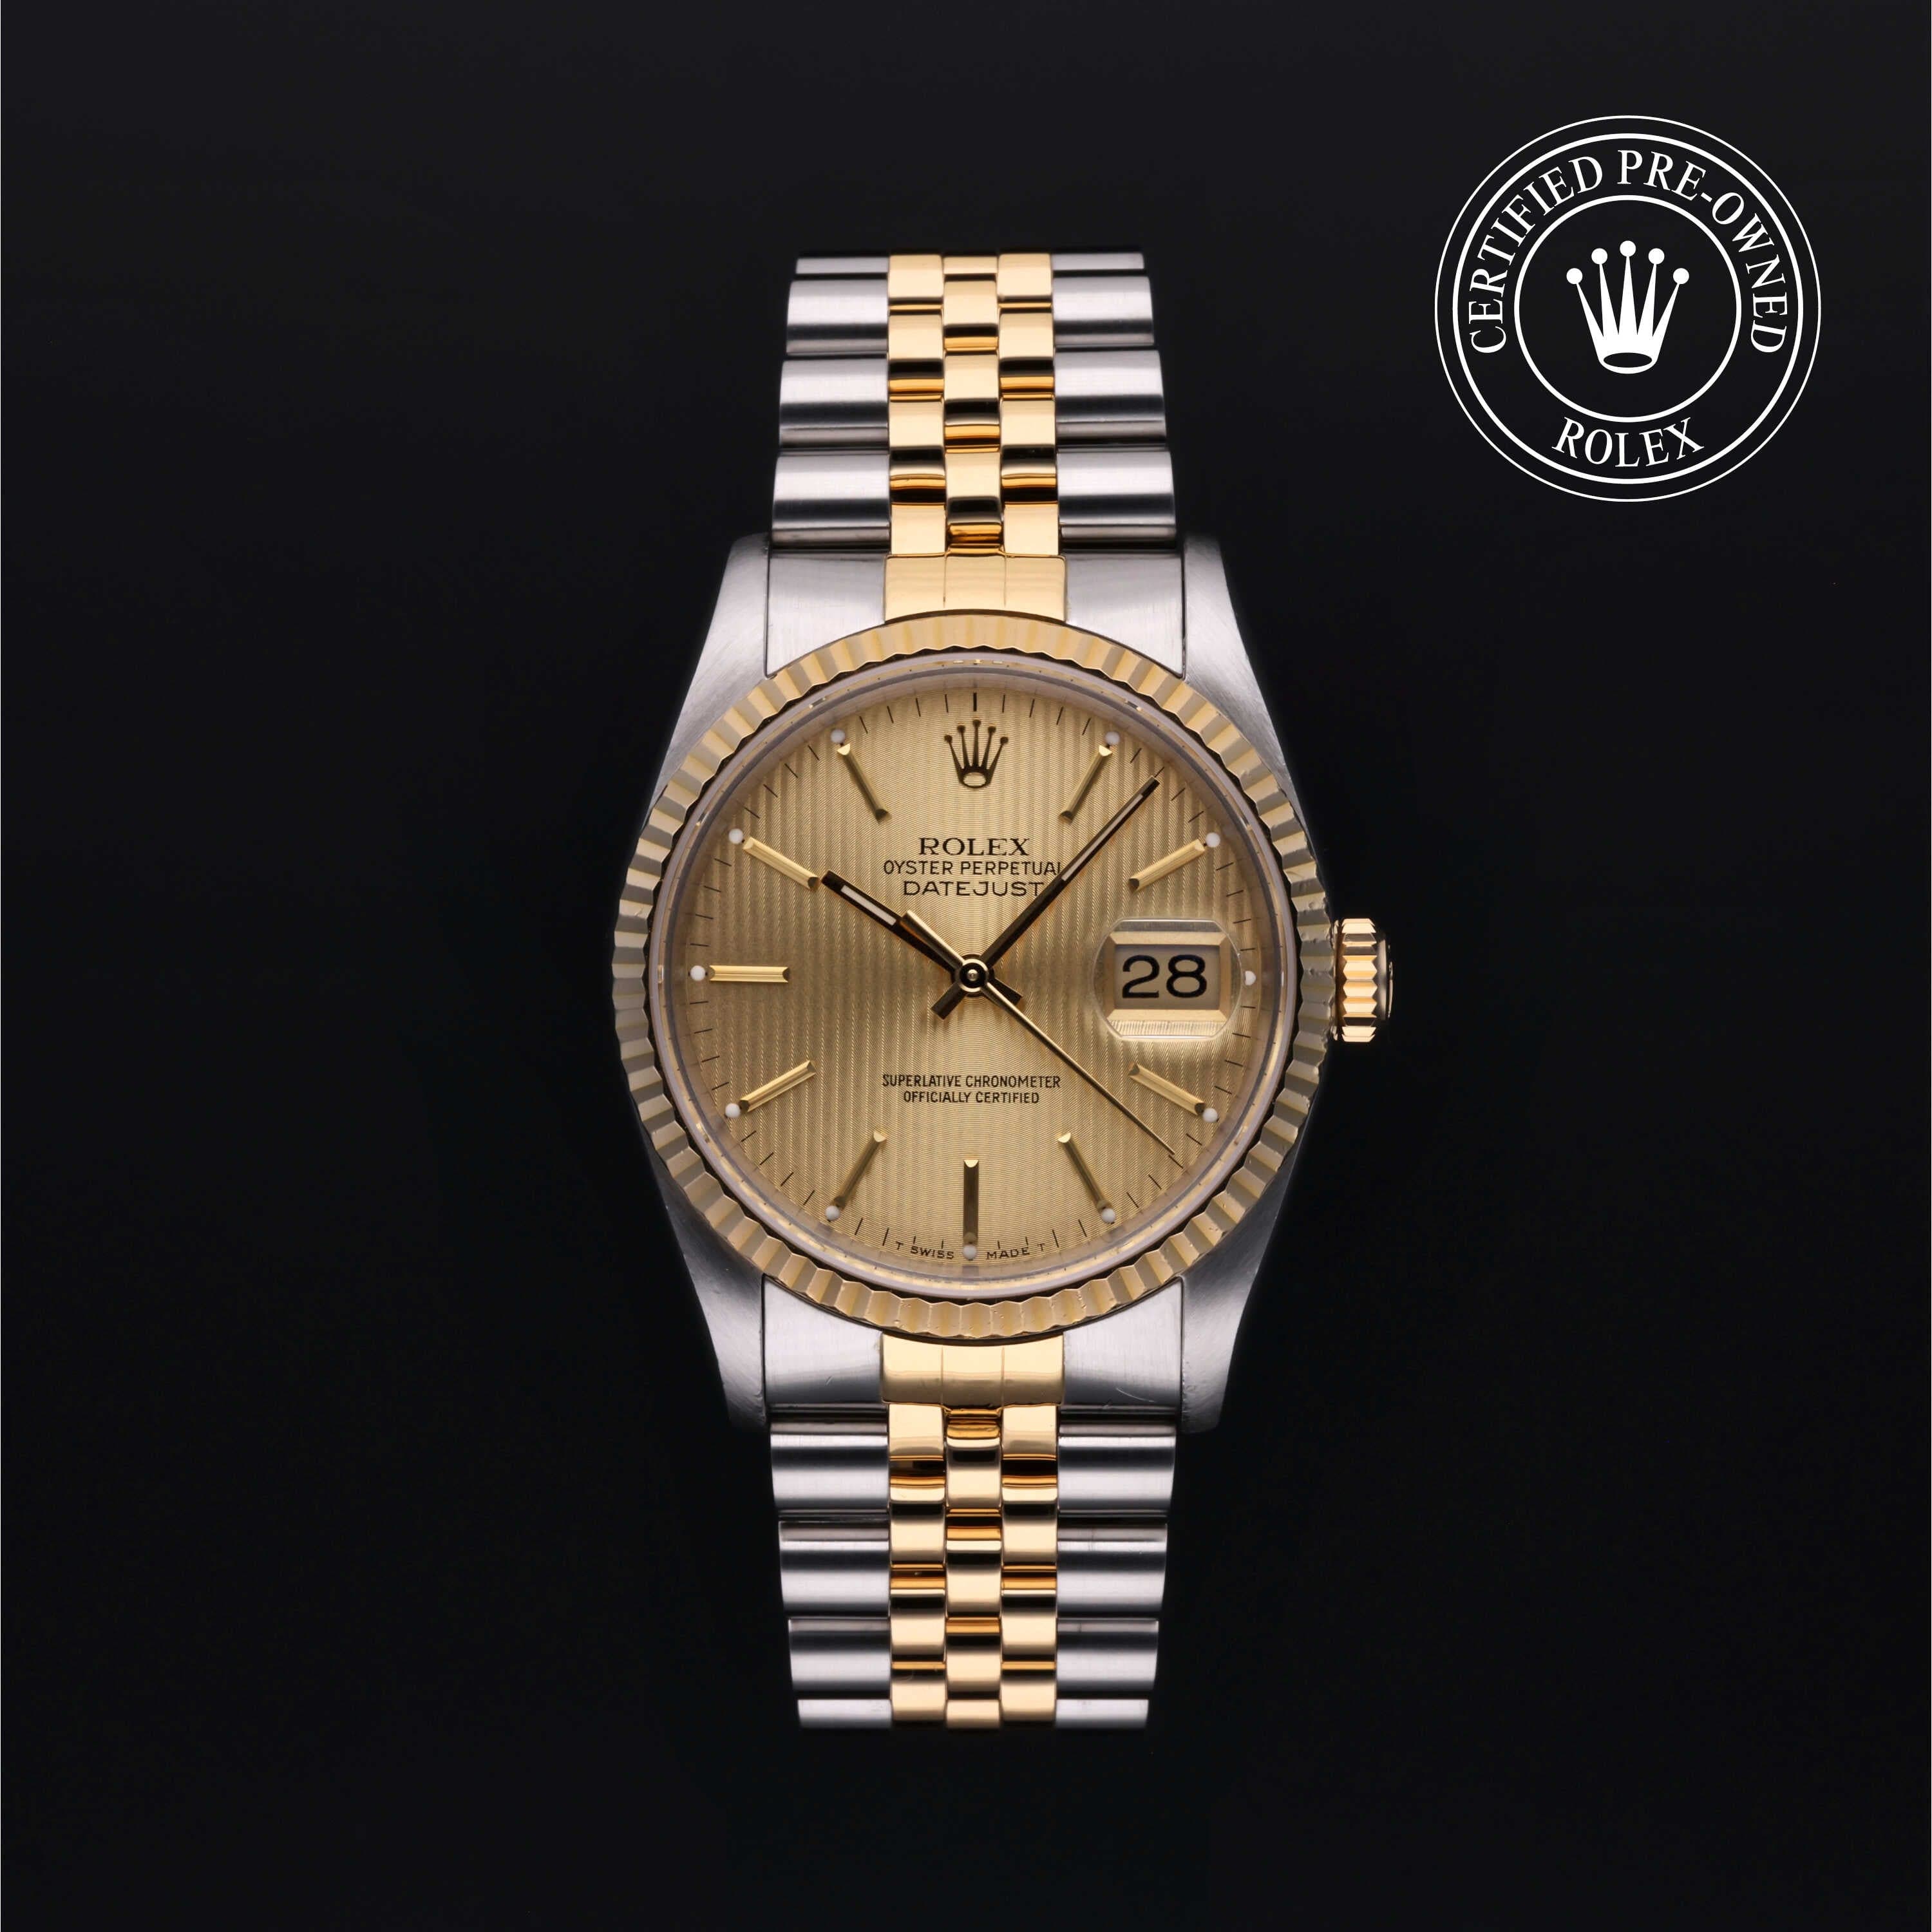 Rolex Certified Pre-Owned Datejust in Jubilee, 36 mm, Stainless steel and yellow gold 16233